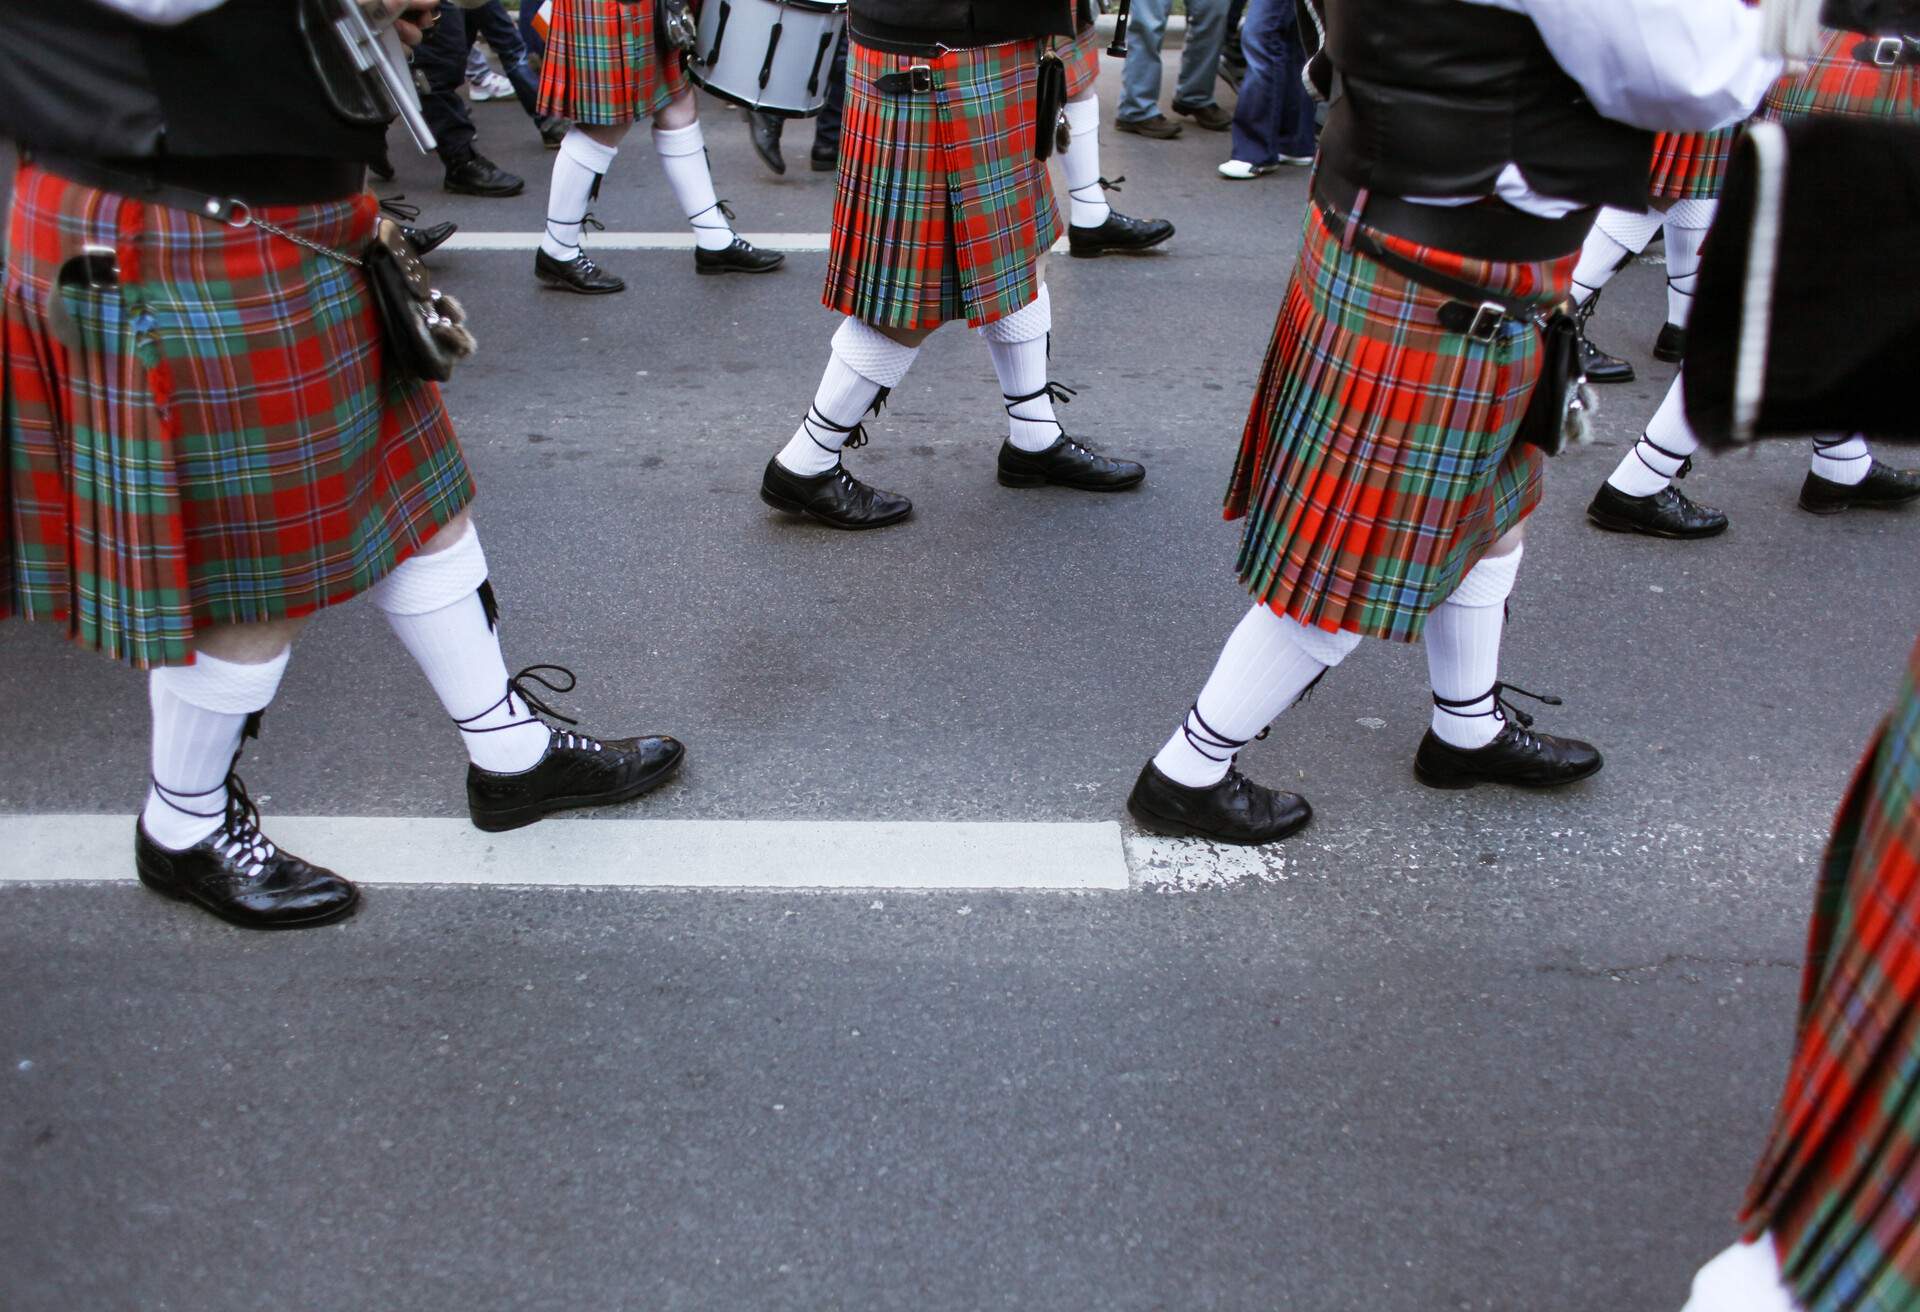 Men dressed in Irish traditional kilts march on the streets during St Patrick's Day.